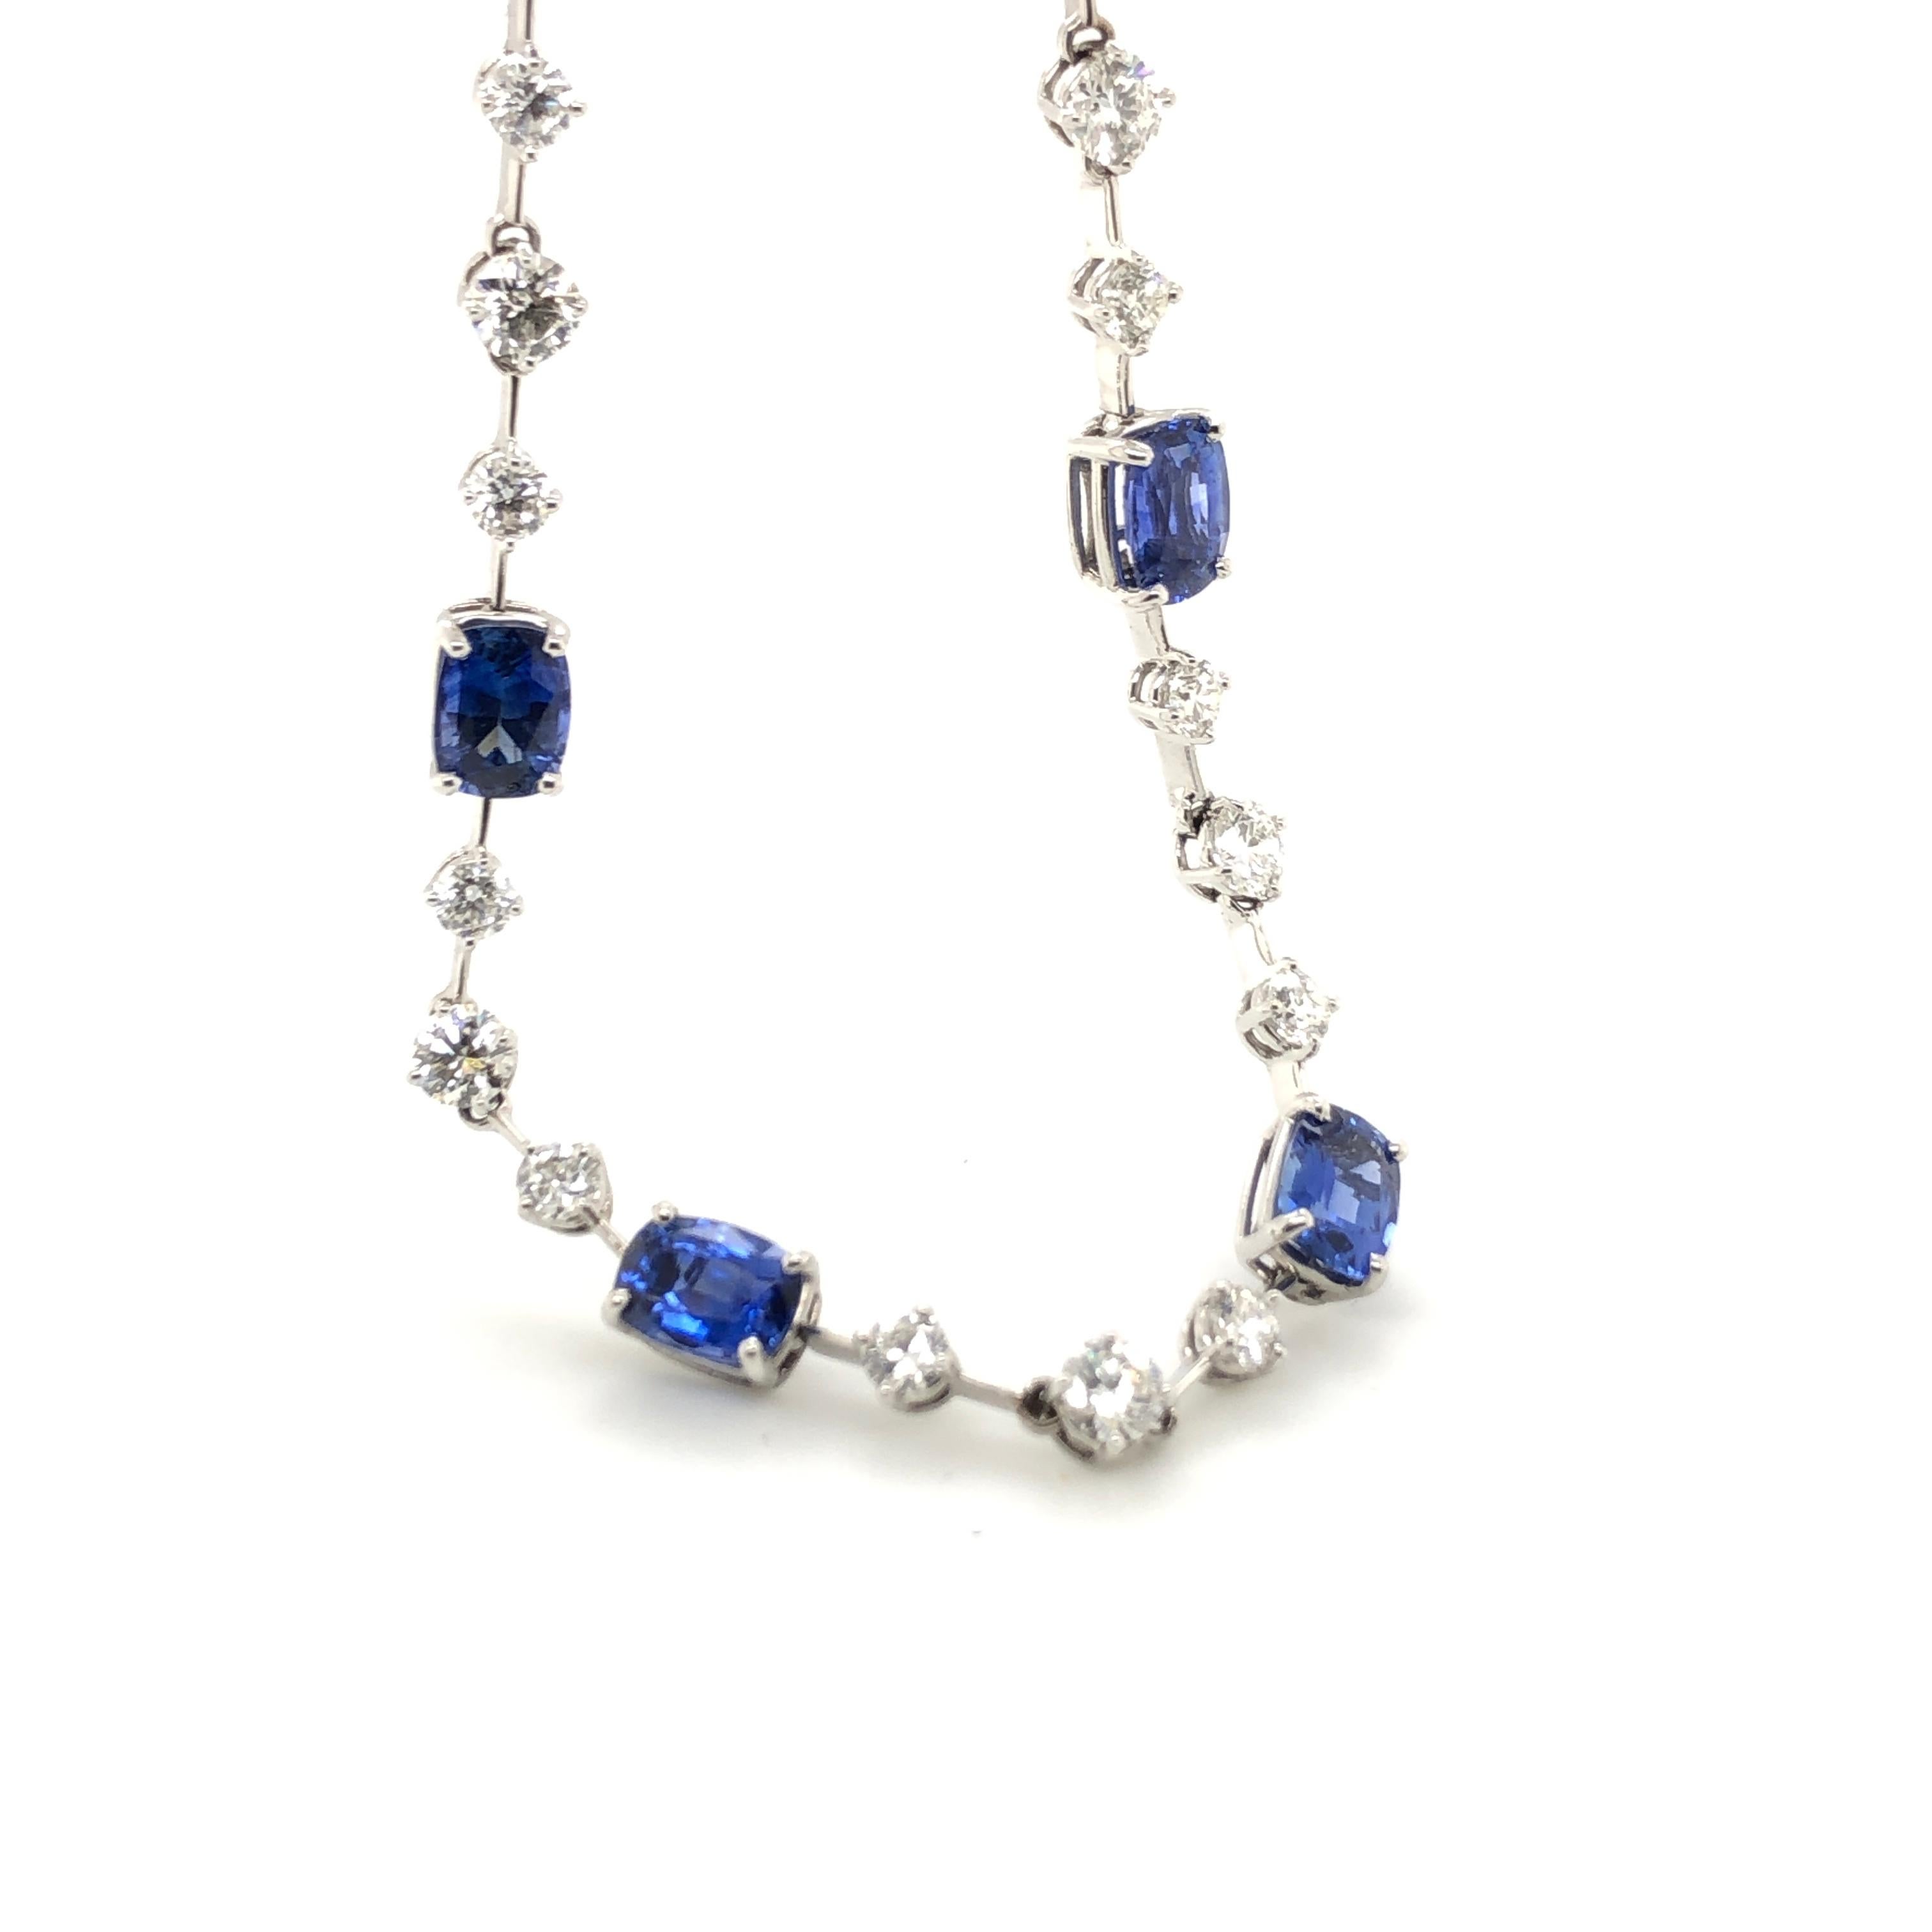 A MUST HAVE for style conscious fashionistas who love blue gems! 
This gorgeous 18k White Gold Sapphire Necklace with 9.75 Carats of Blue Sapphire and 5.75 Carats of White Diamonds.